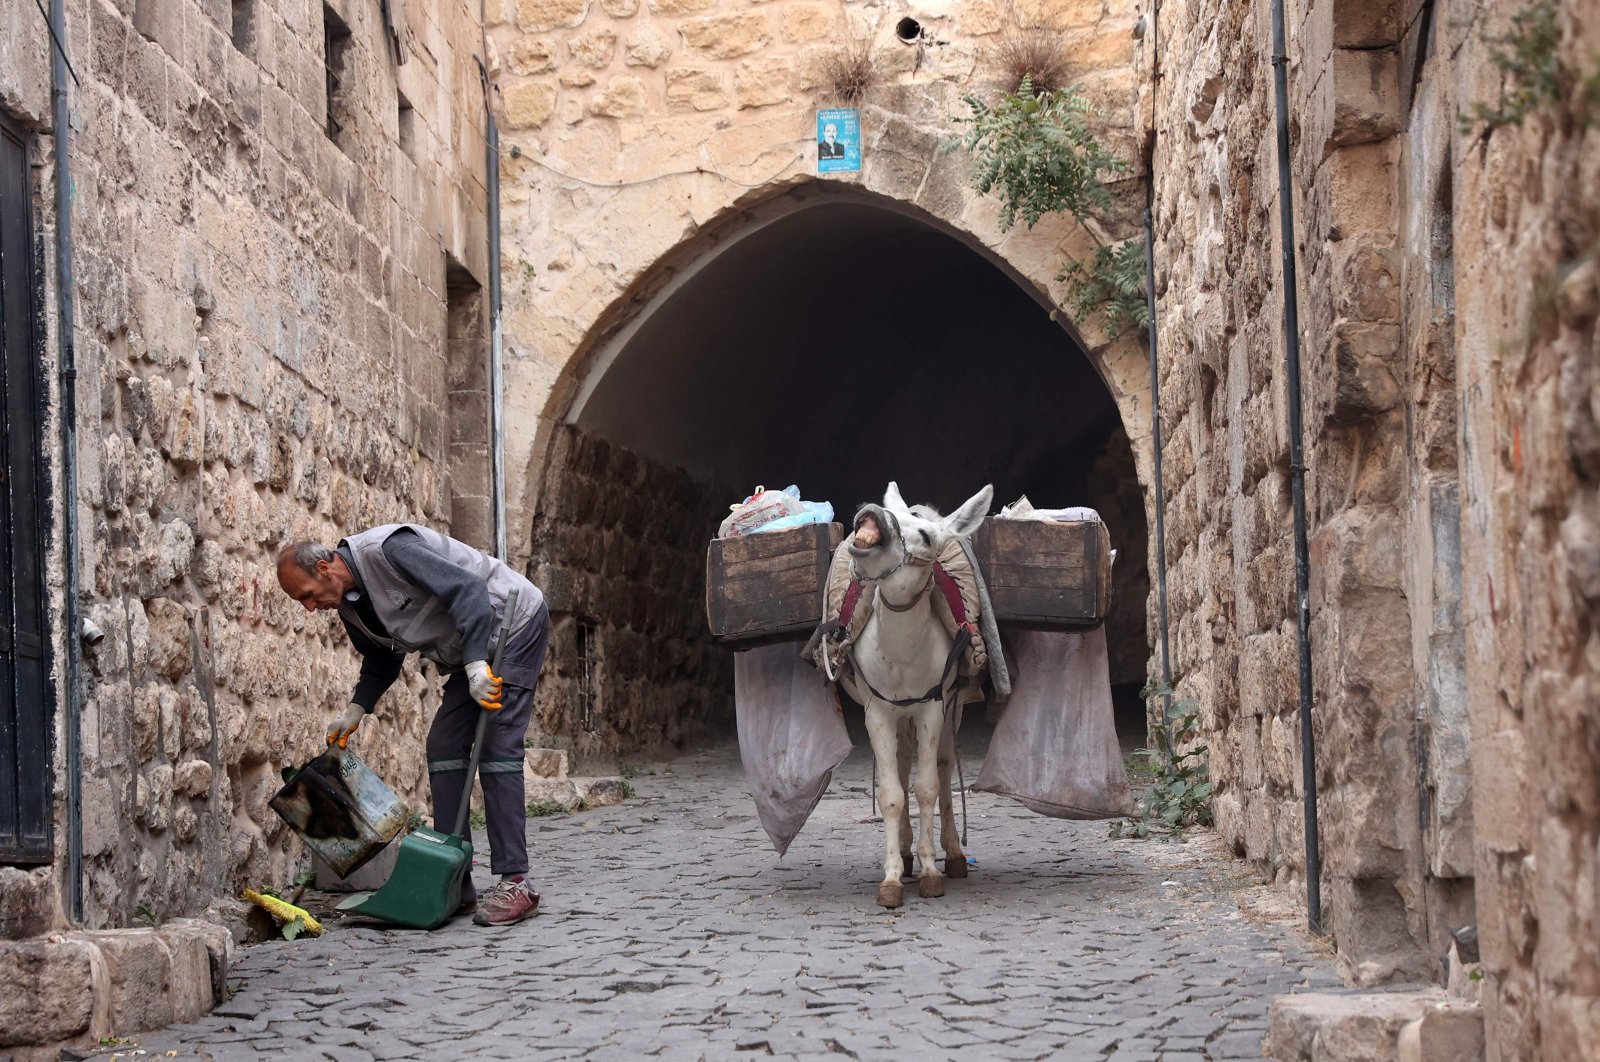 A municipal employee guiding a donkey collects garbage in the old city of Mardin, southeastern Turkey, on Oct. 18, 2021. (AFP Photo)